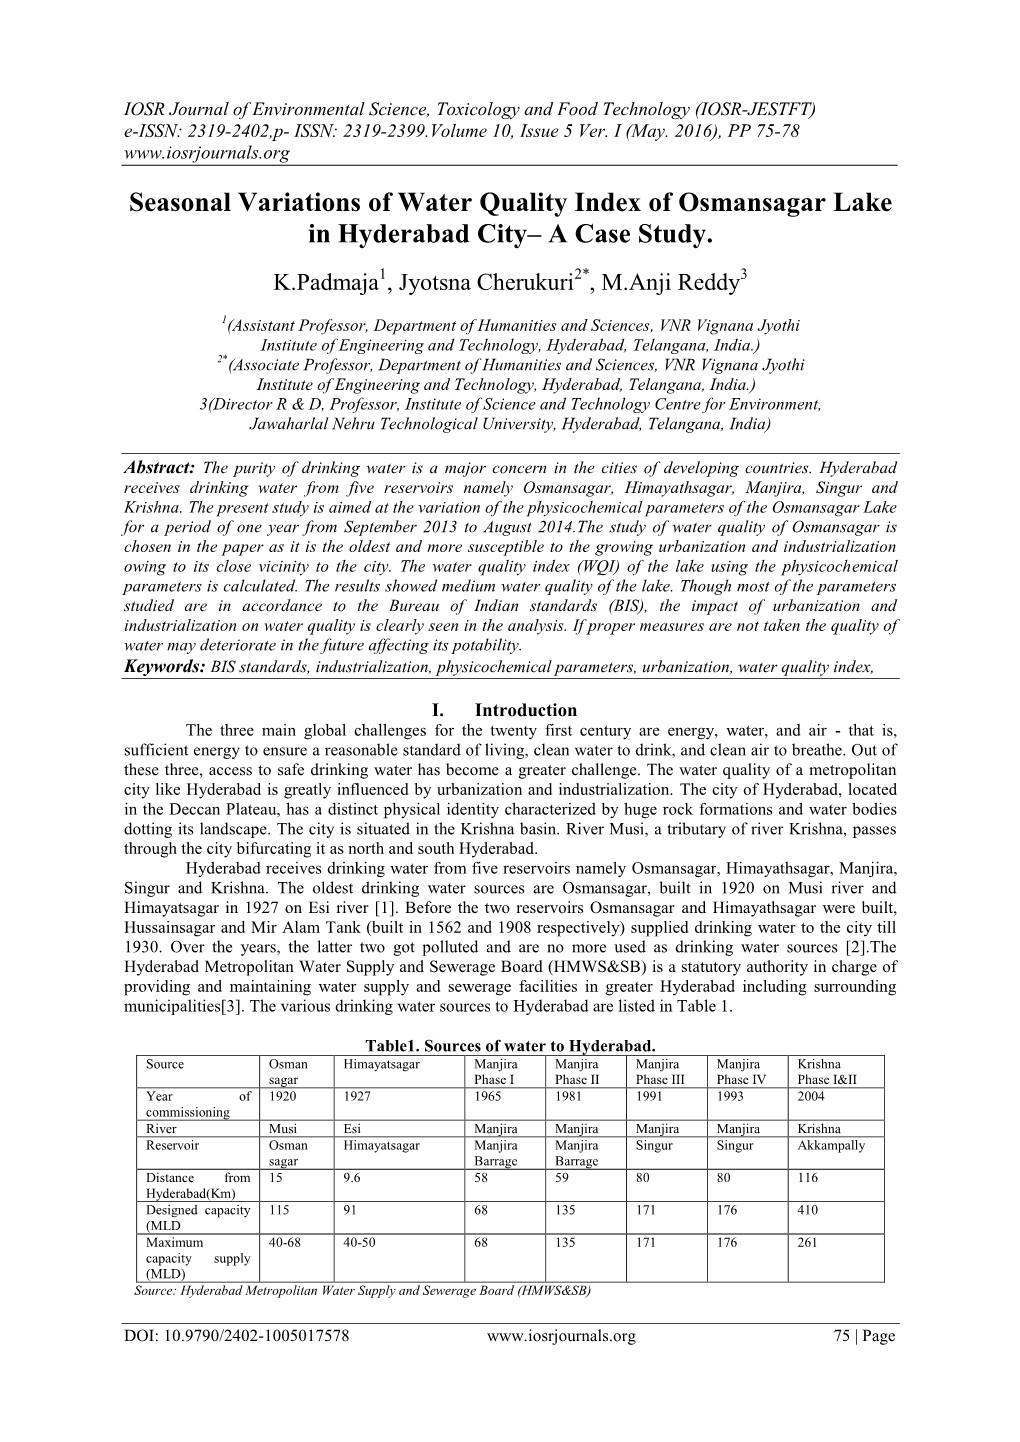 Seasonal Variations of Water Quality Index of Osmansagar Lake in Hyderabad City– a Case Study